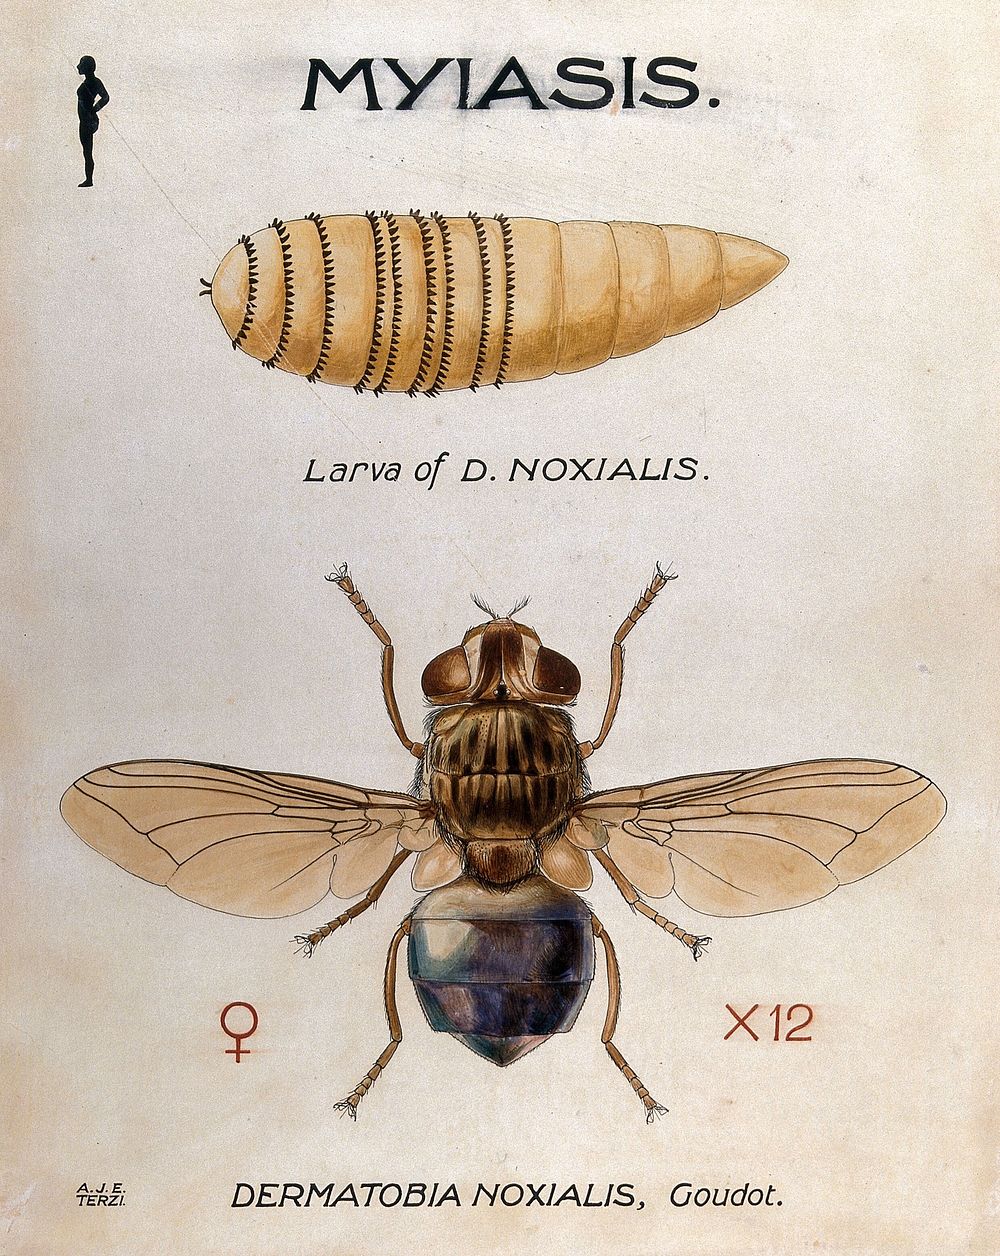 The larva and fly of Dermatobia noxialis. Coloured drawing by A.J.E. Terzi.